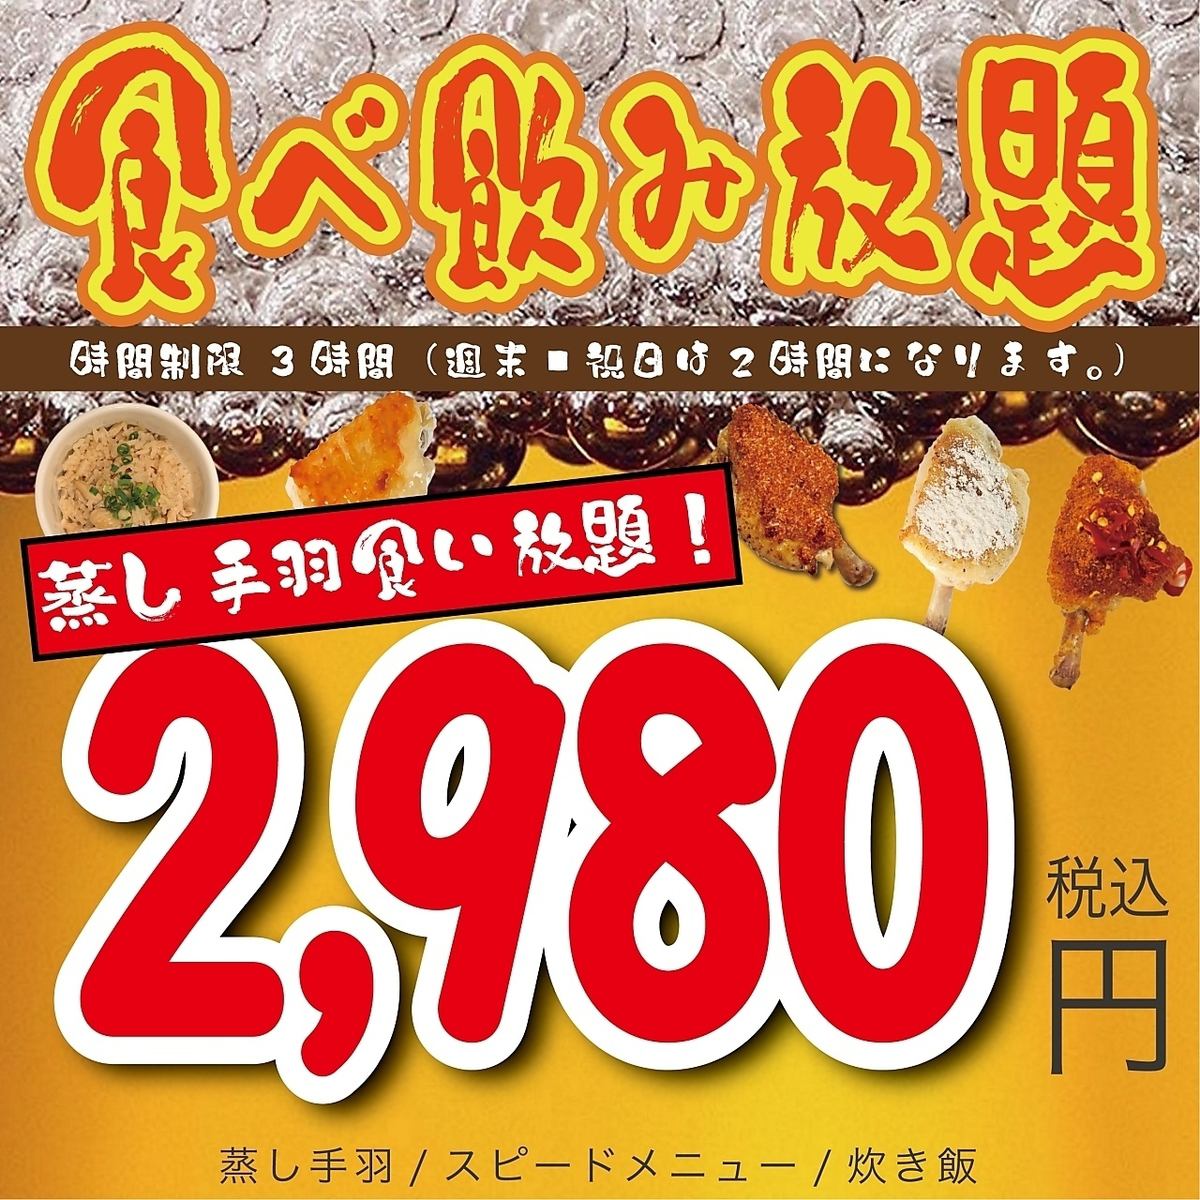 Steamed chicken wings, dumplings, and more! All-you-can-eat course from 2,980 yen!